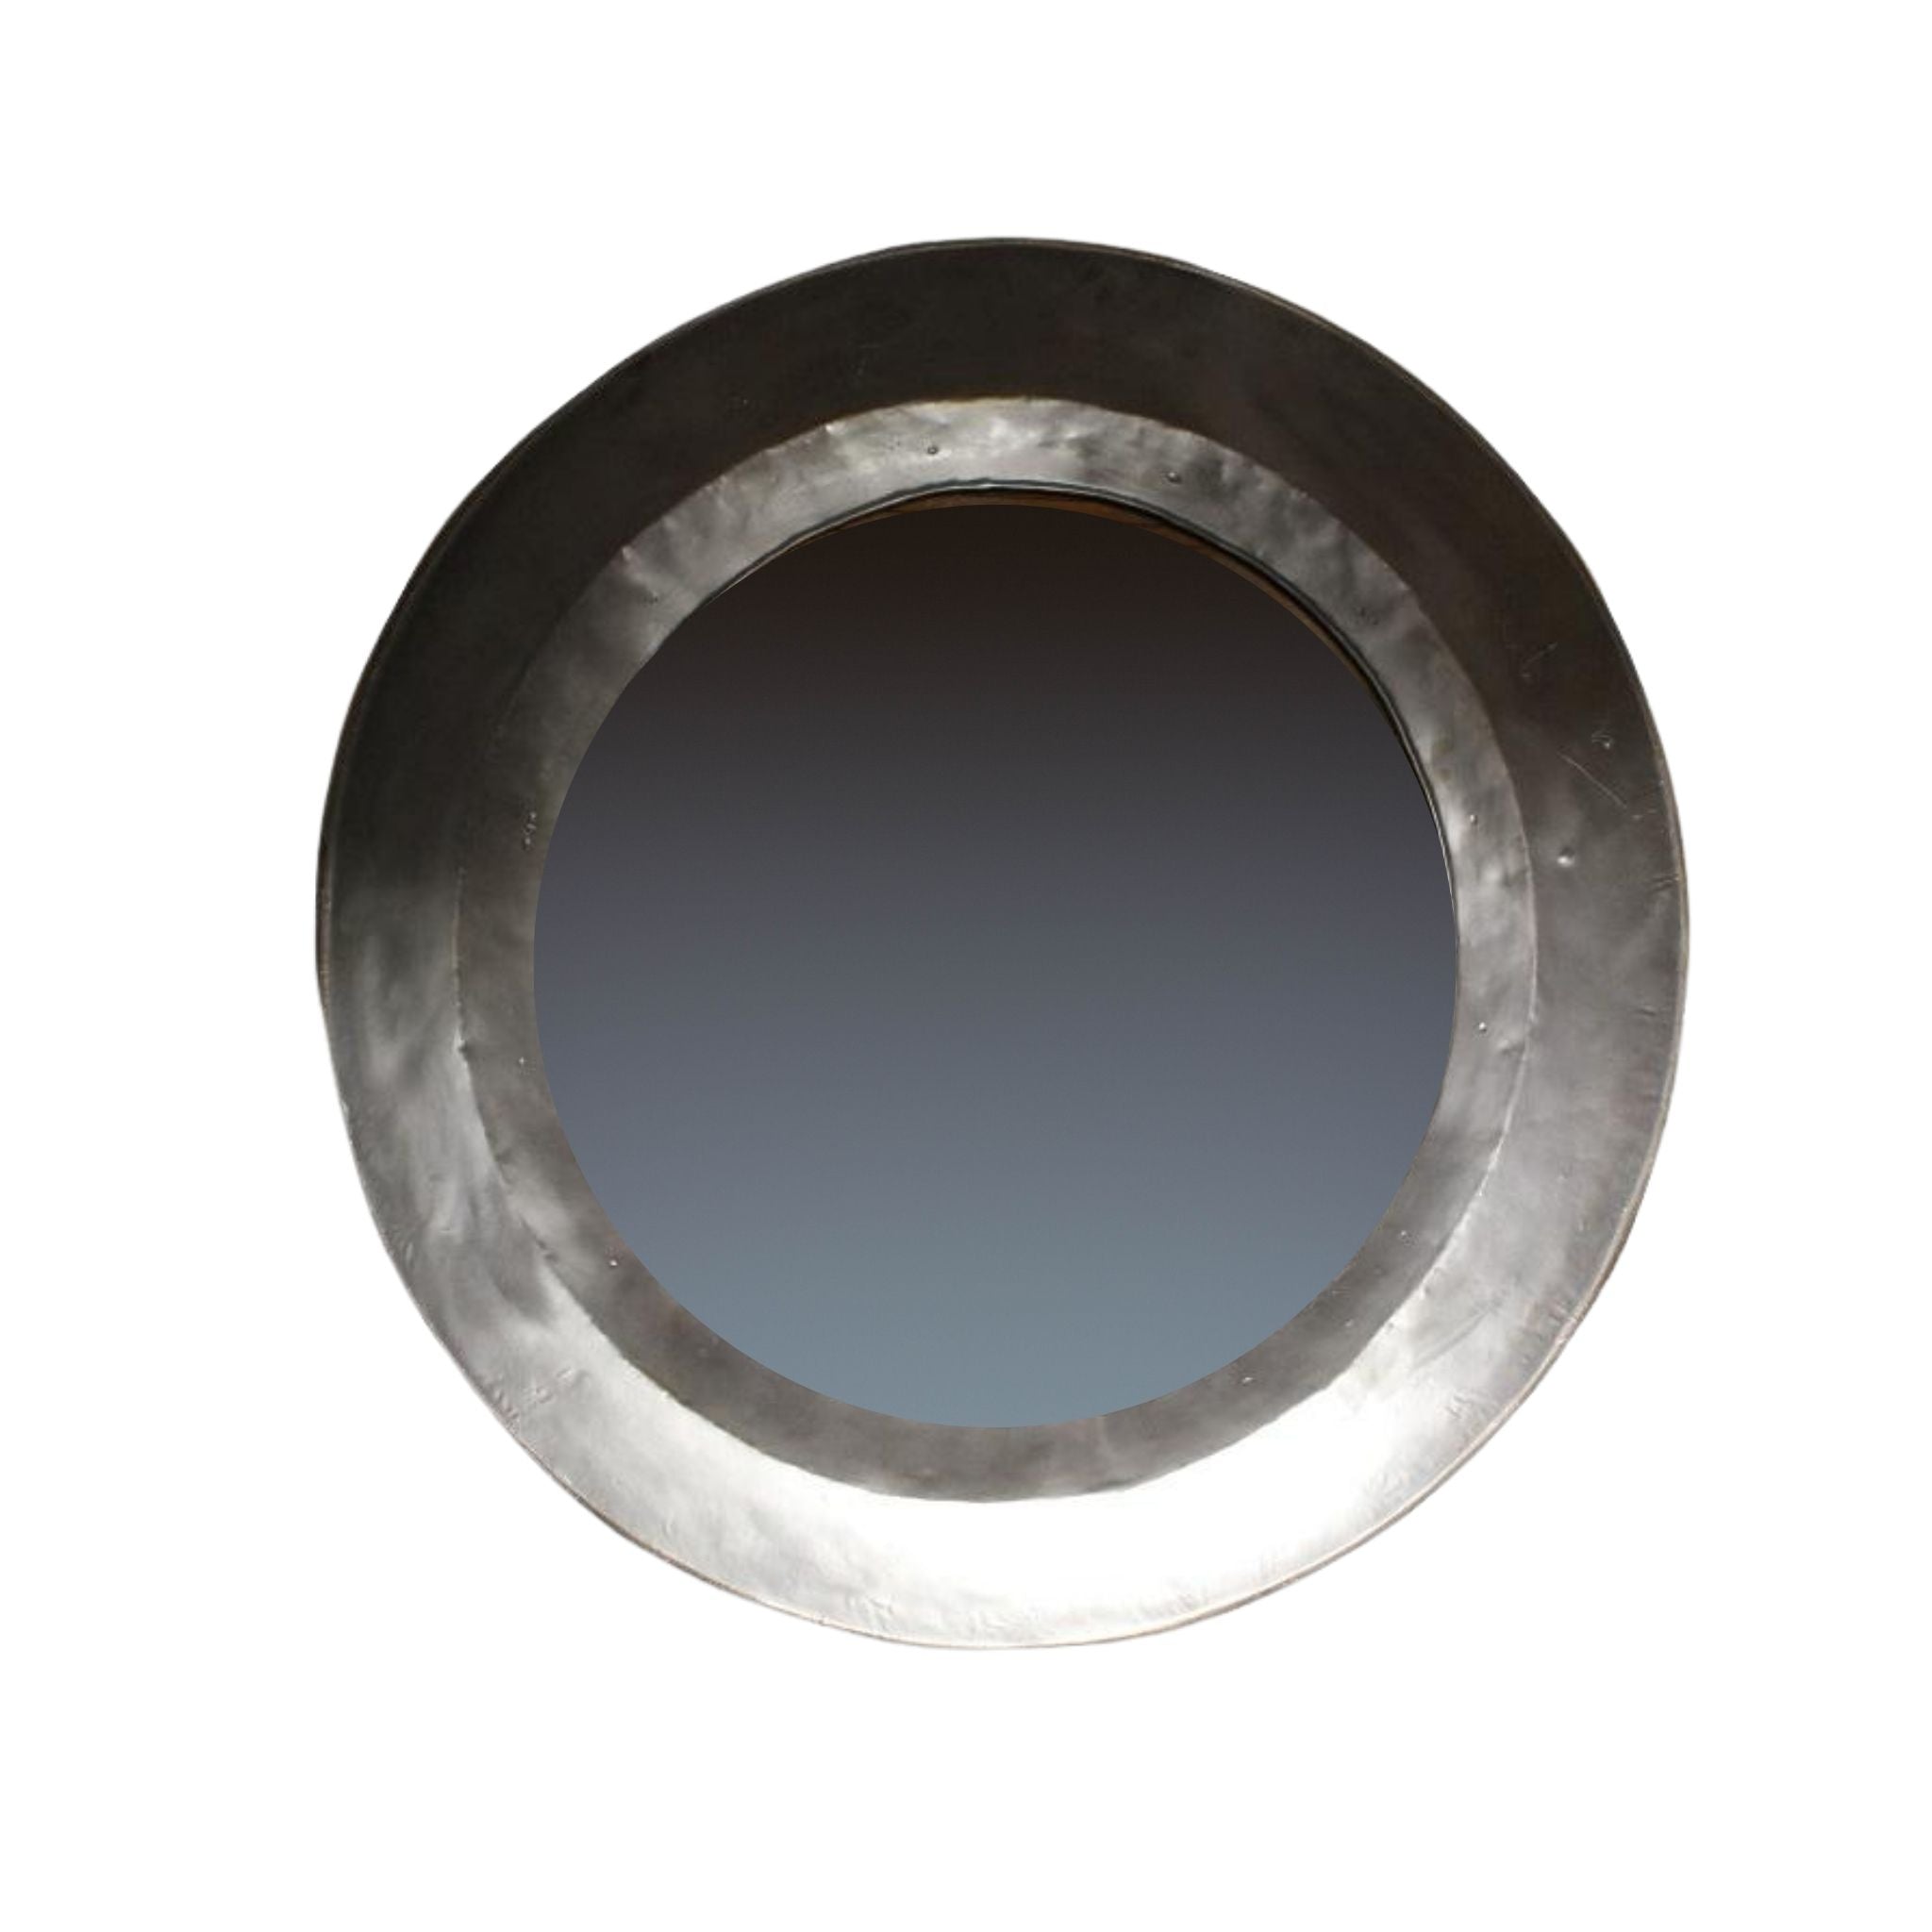 Chapatti mirror made from reclaimed chapatti bowl